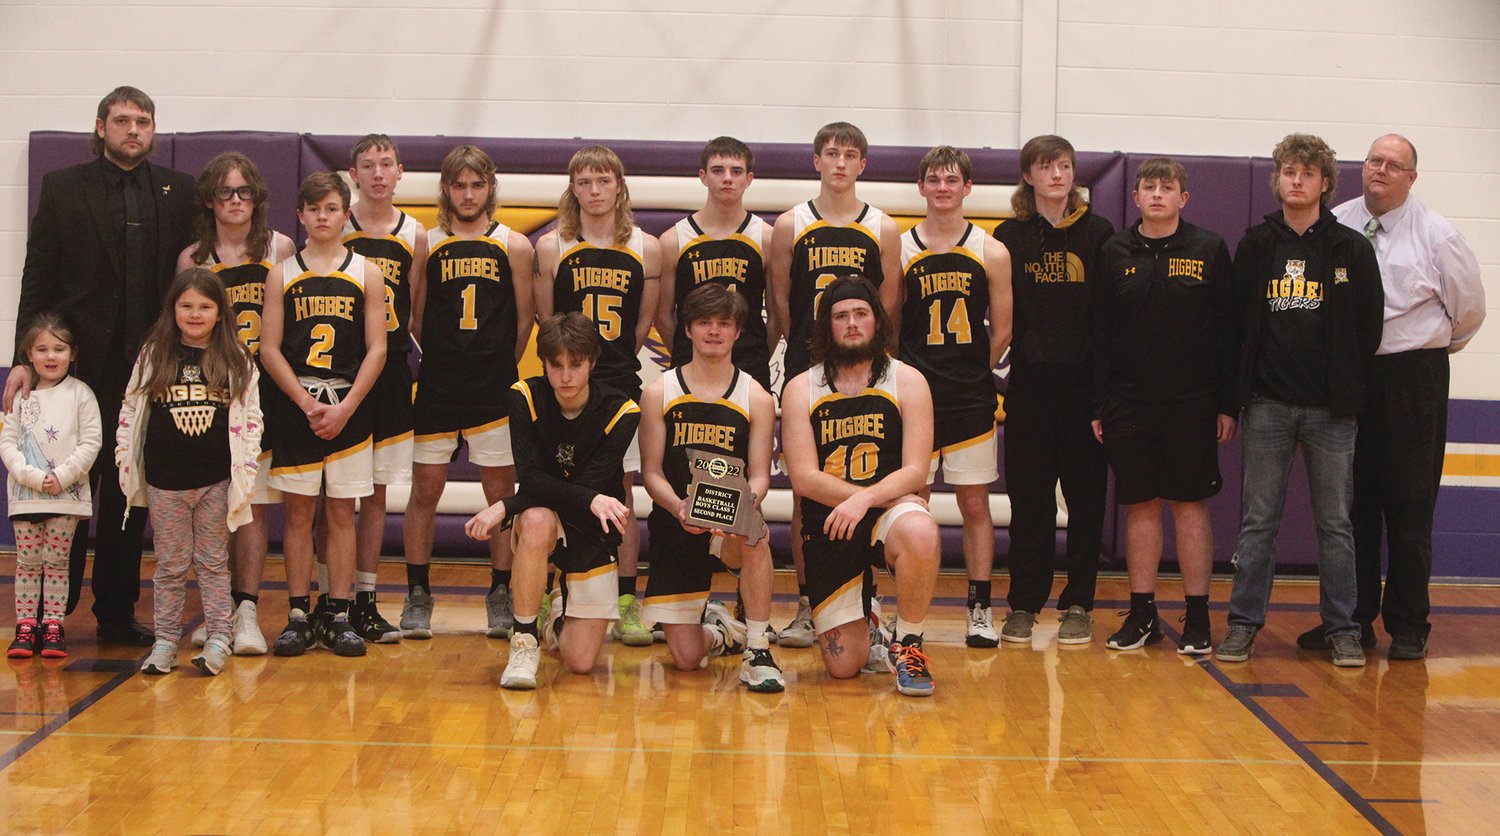 The Higbee boys basketball team poses with its second-place trophy after losing to Wellsville-Middletown 38-34 in the Class 1, District 10 finals on Feb. 25 at Pilot Grove High School. THEO TATE PHOTO